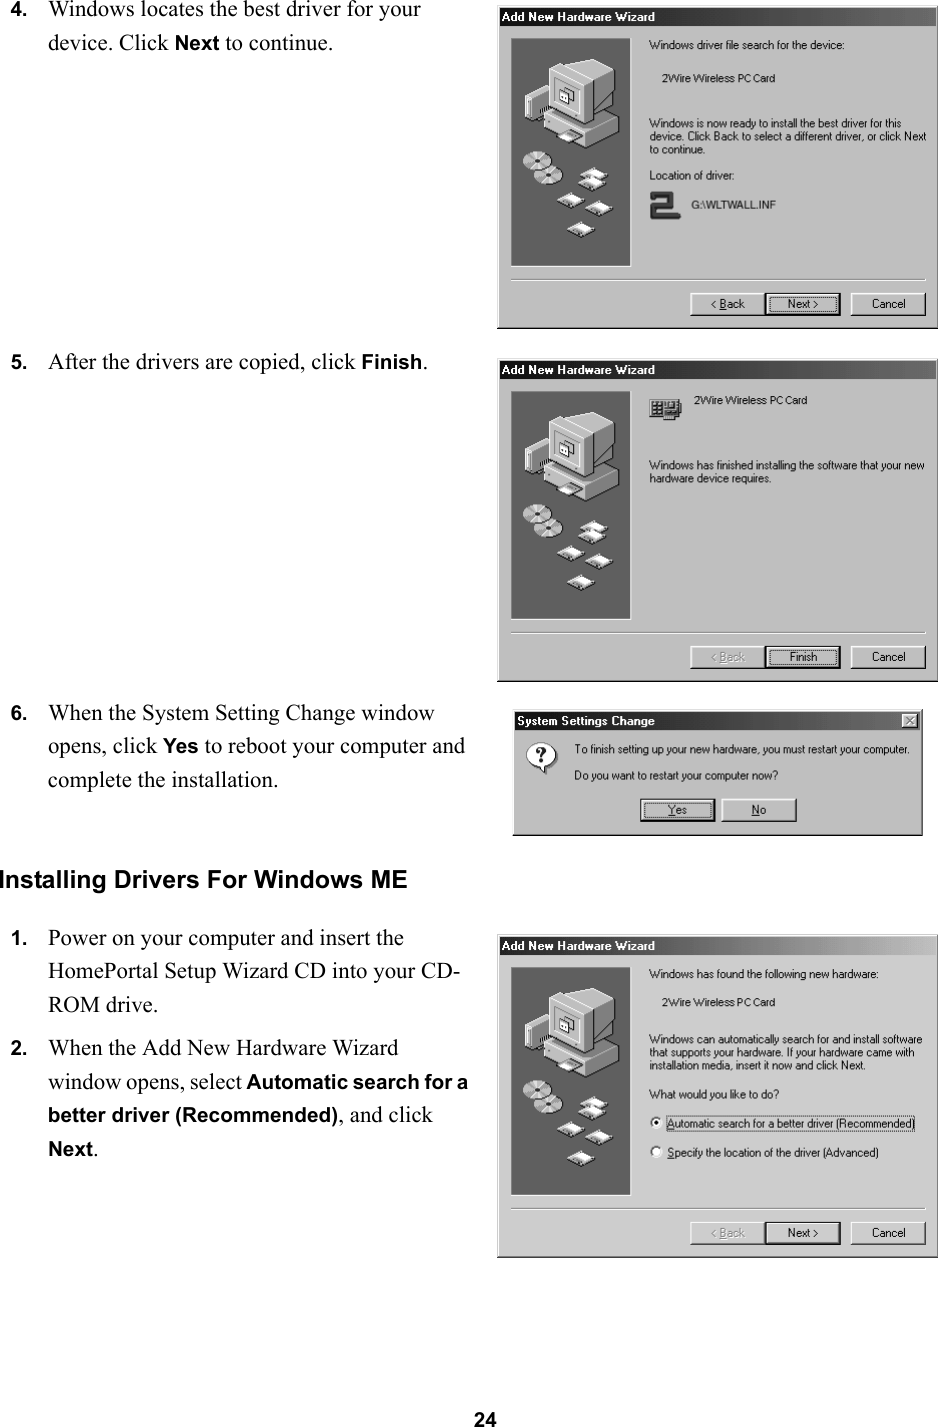 24Installing Drivers For Windows ME4. Windows locates the best driver for your device. Click Next to continue.5. After the drivers are copied, click Finish.6. When the System Setting Change window opens, click Yes to reboot your computer and complete the installation.1. Power on your computer and insert the HomePortal Setup Wizard CD into your CD-ROM drive.2. When the Add New Hardware Wizard window opens, select Automatic search for a better driver (Recommended), and click Next.